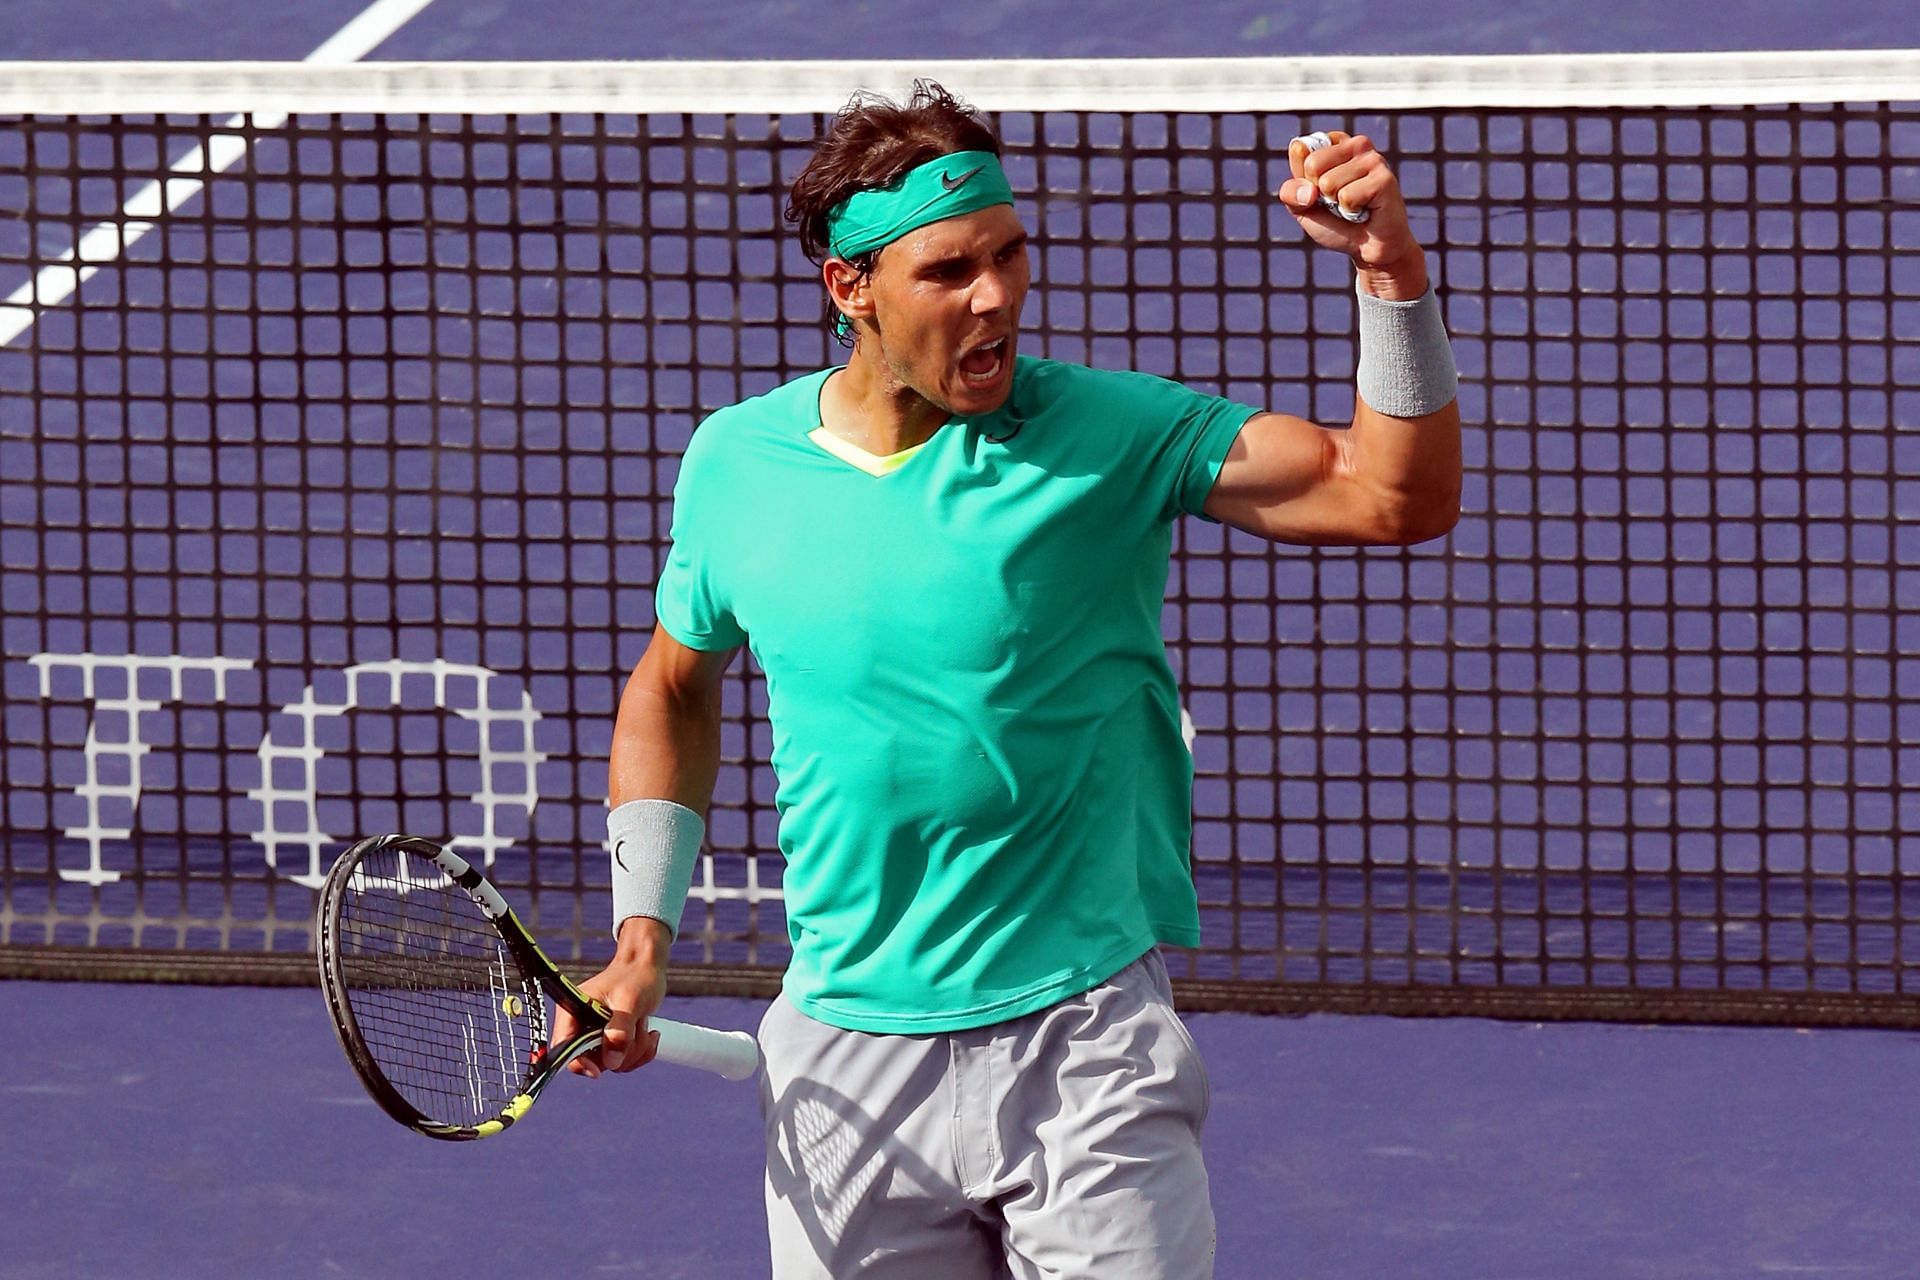 Rafael Nadal will beat the Indian Wells record of best win percentage by winning his next match.